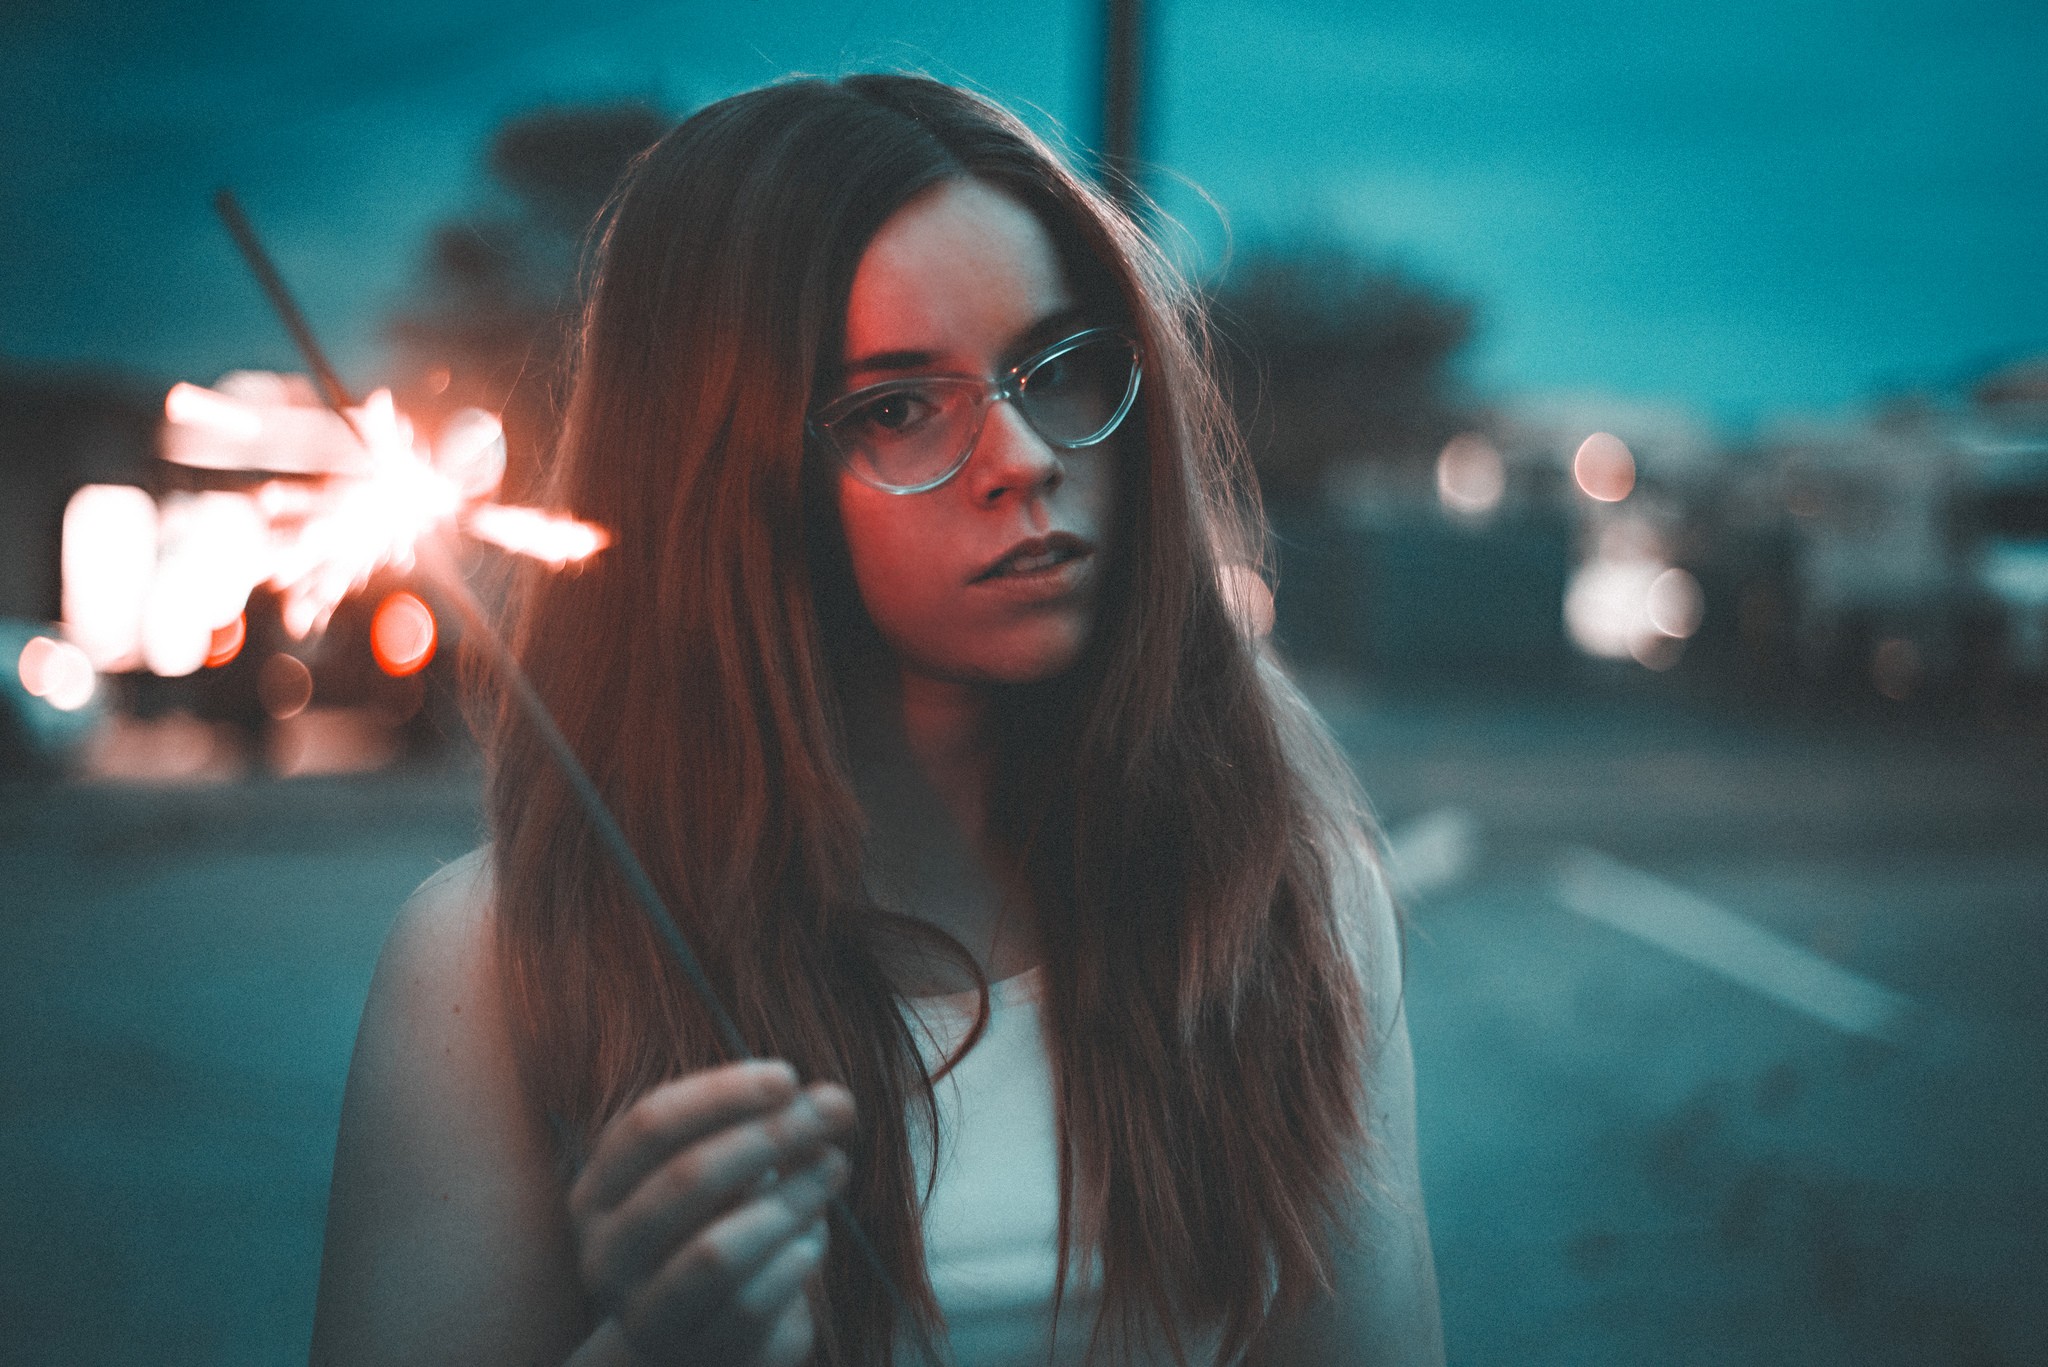 Women Brunette Women With Glasses Looking At Viewer Sparkler Glasses Urban Women Outdoors Long Hair 2048x1367